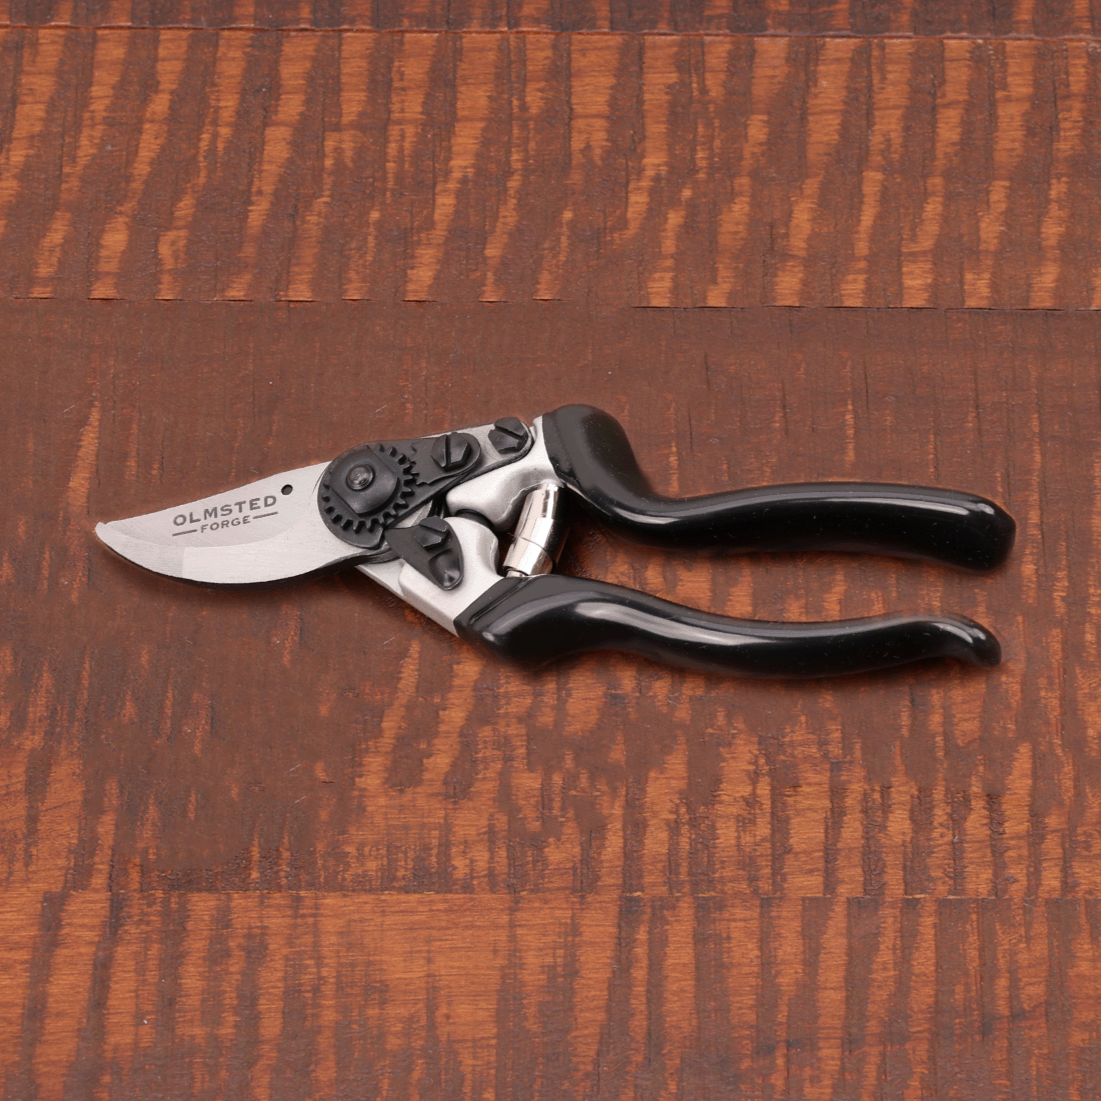 Hand Bypass Pruner – Olmsted Forge